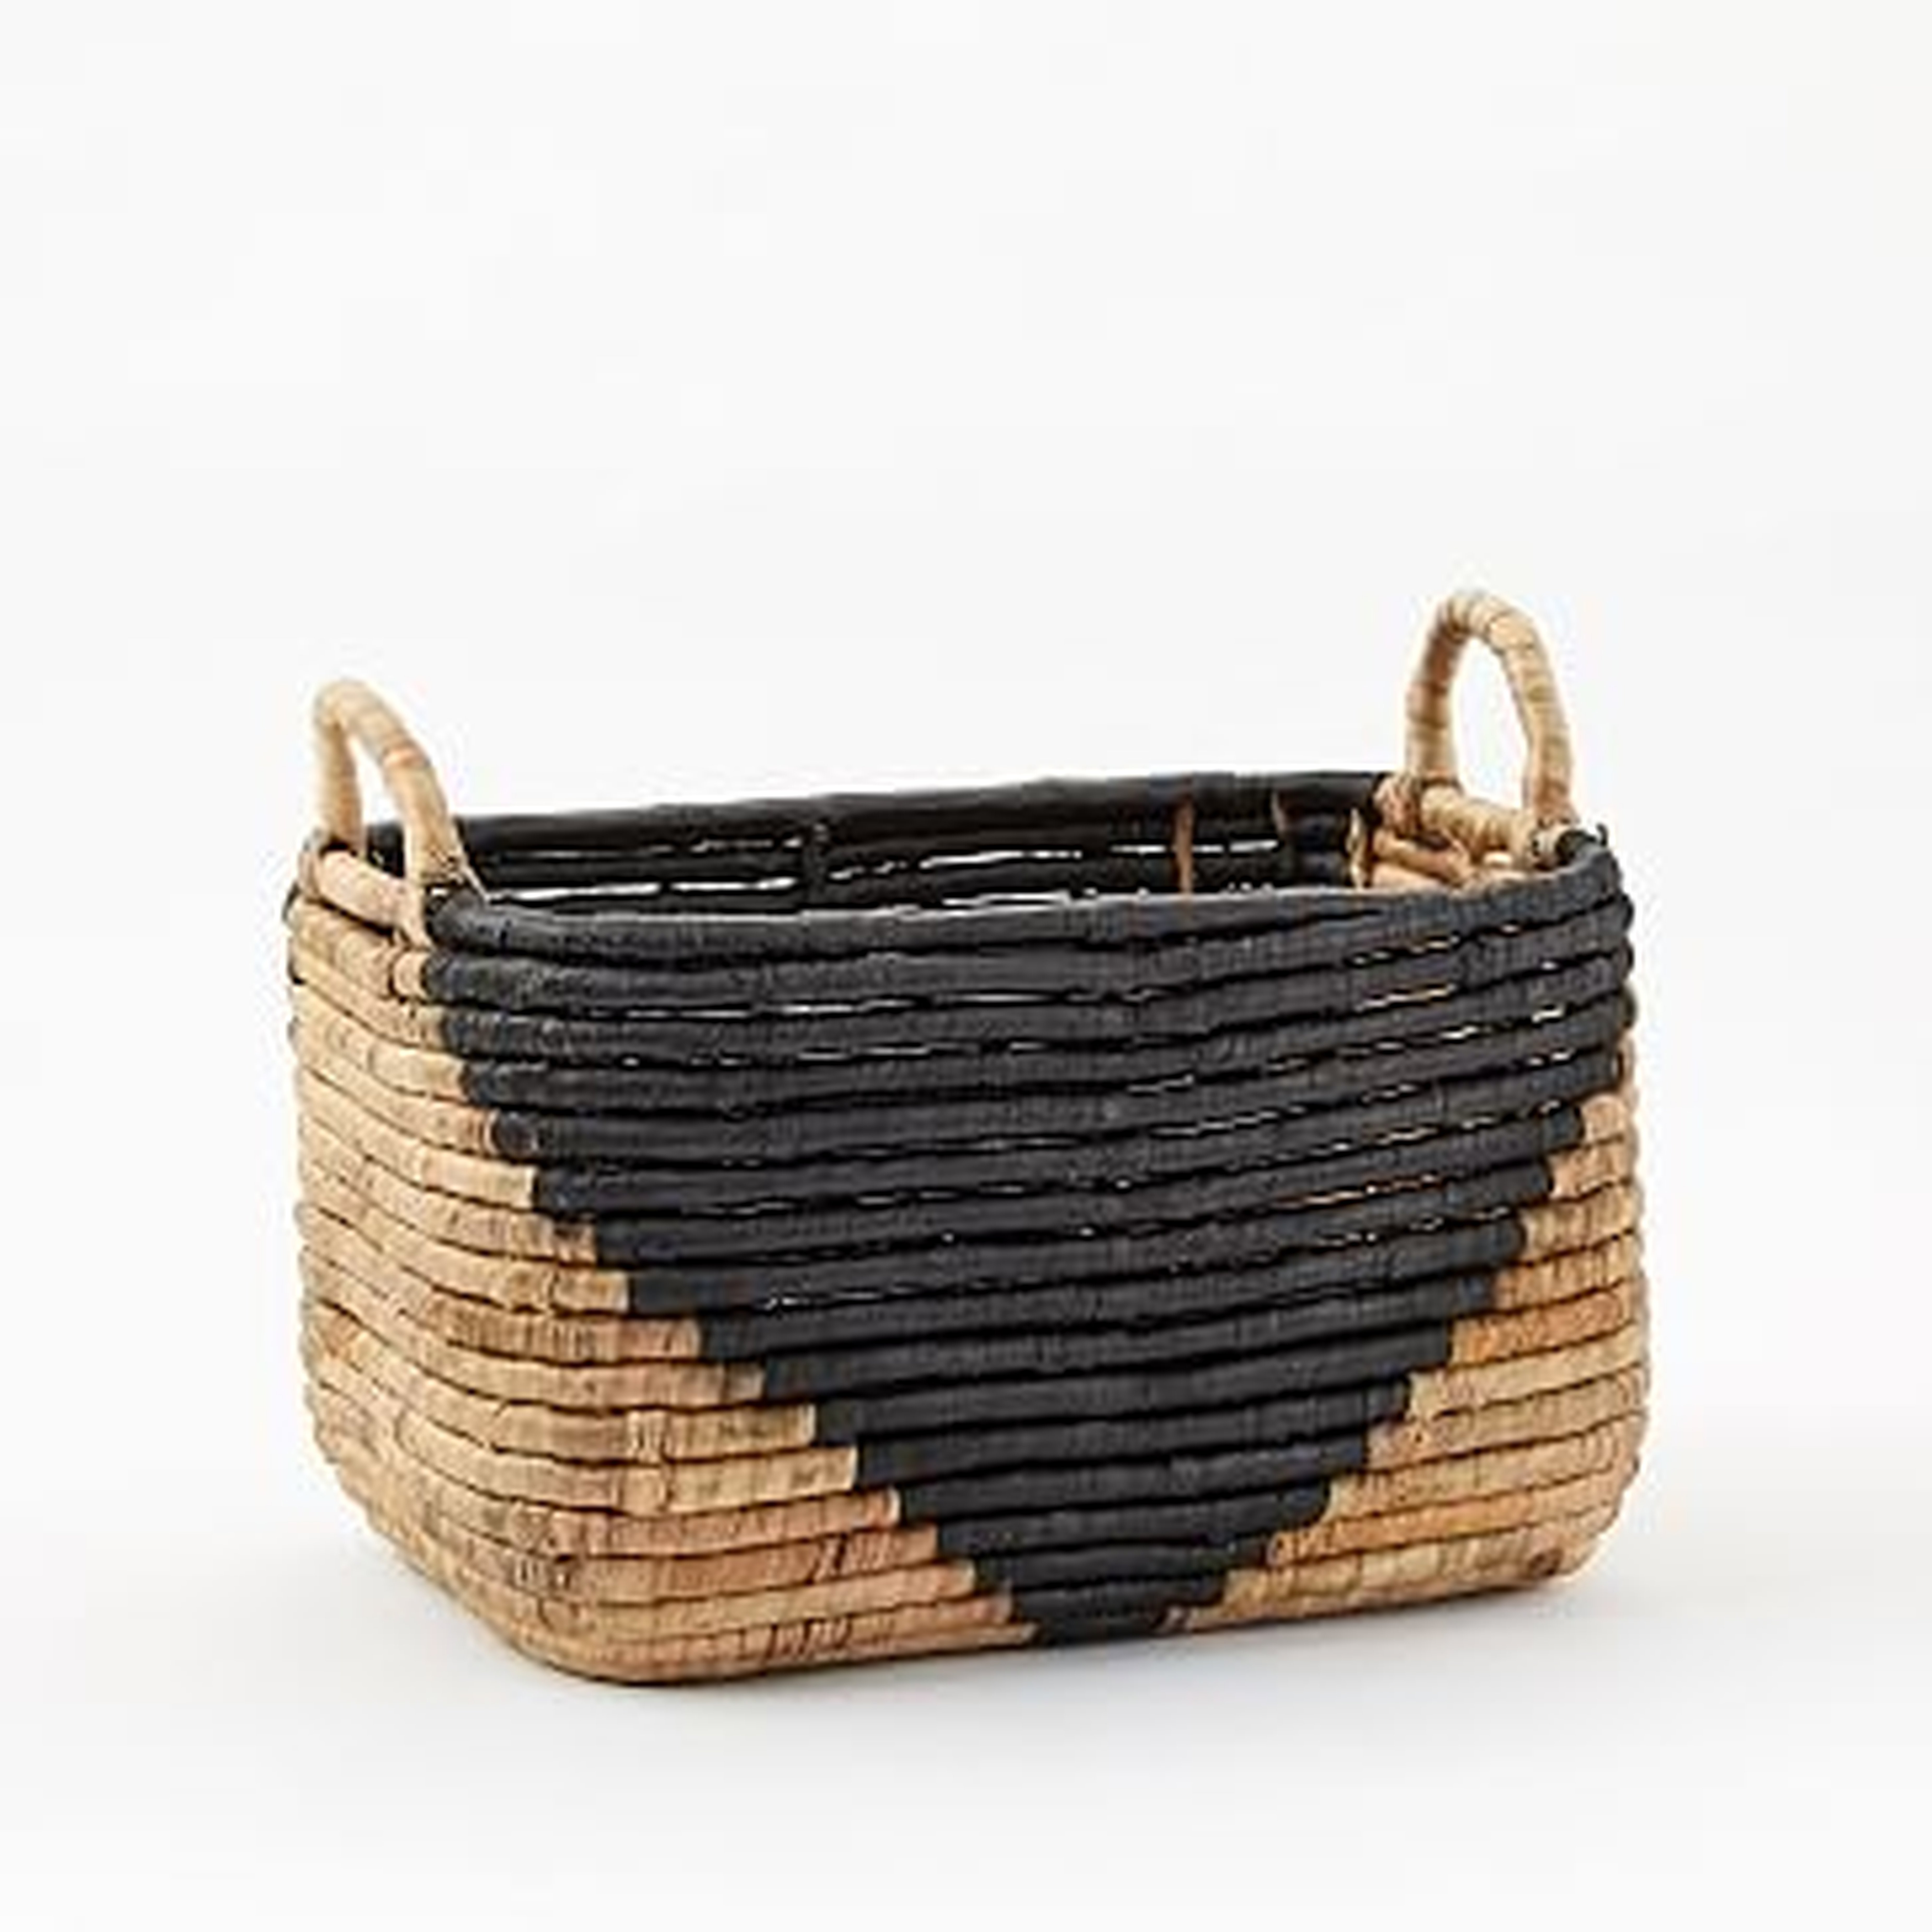 Two-Tone Seagrass Baskets, Medium Rectangle, 10" - West Elm